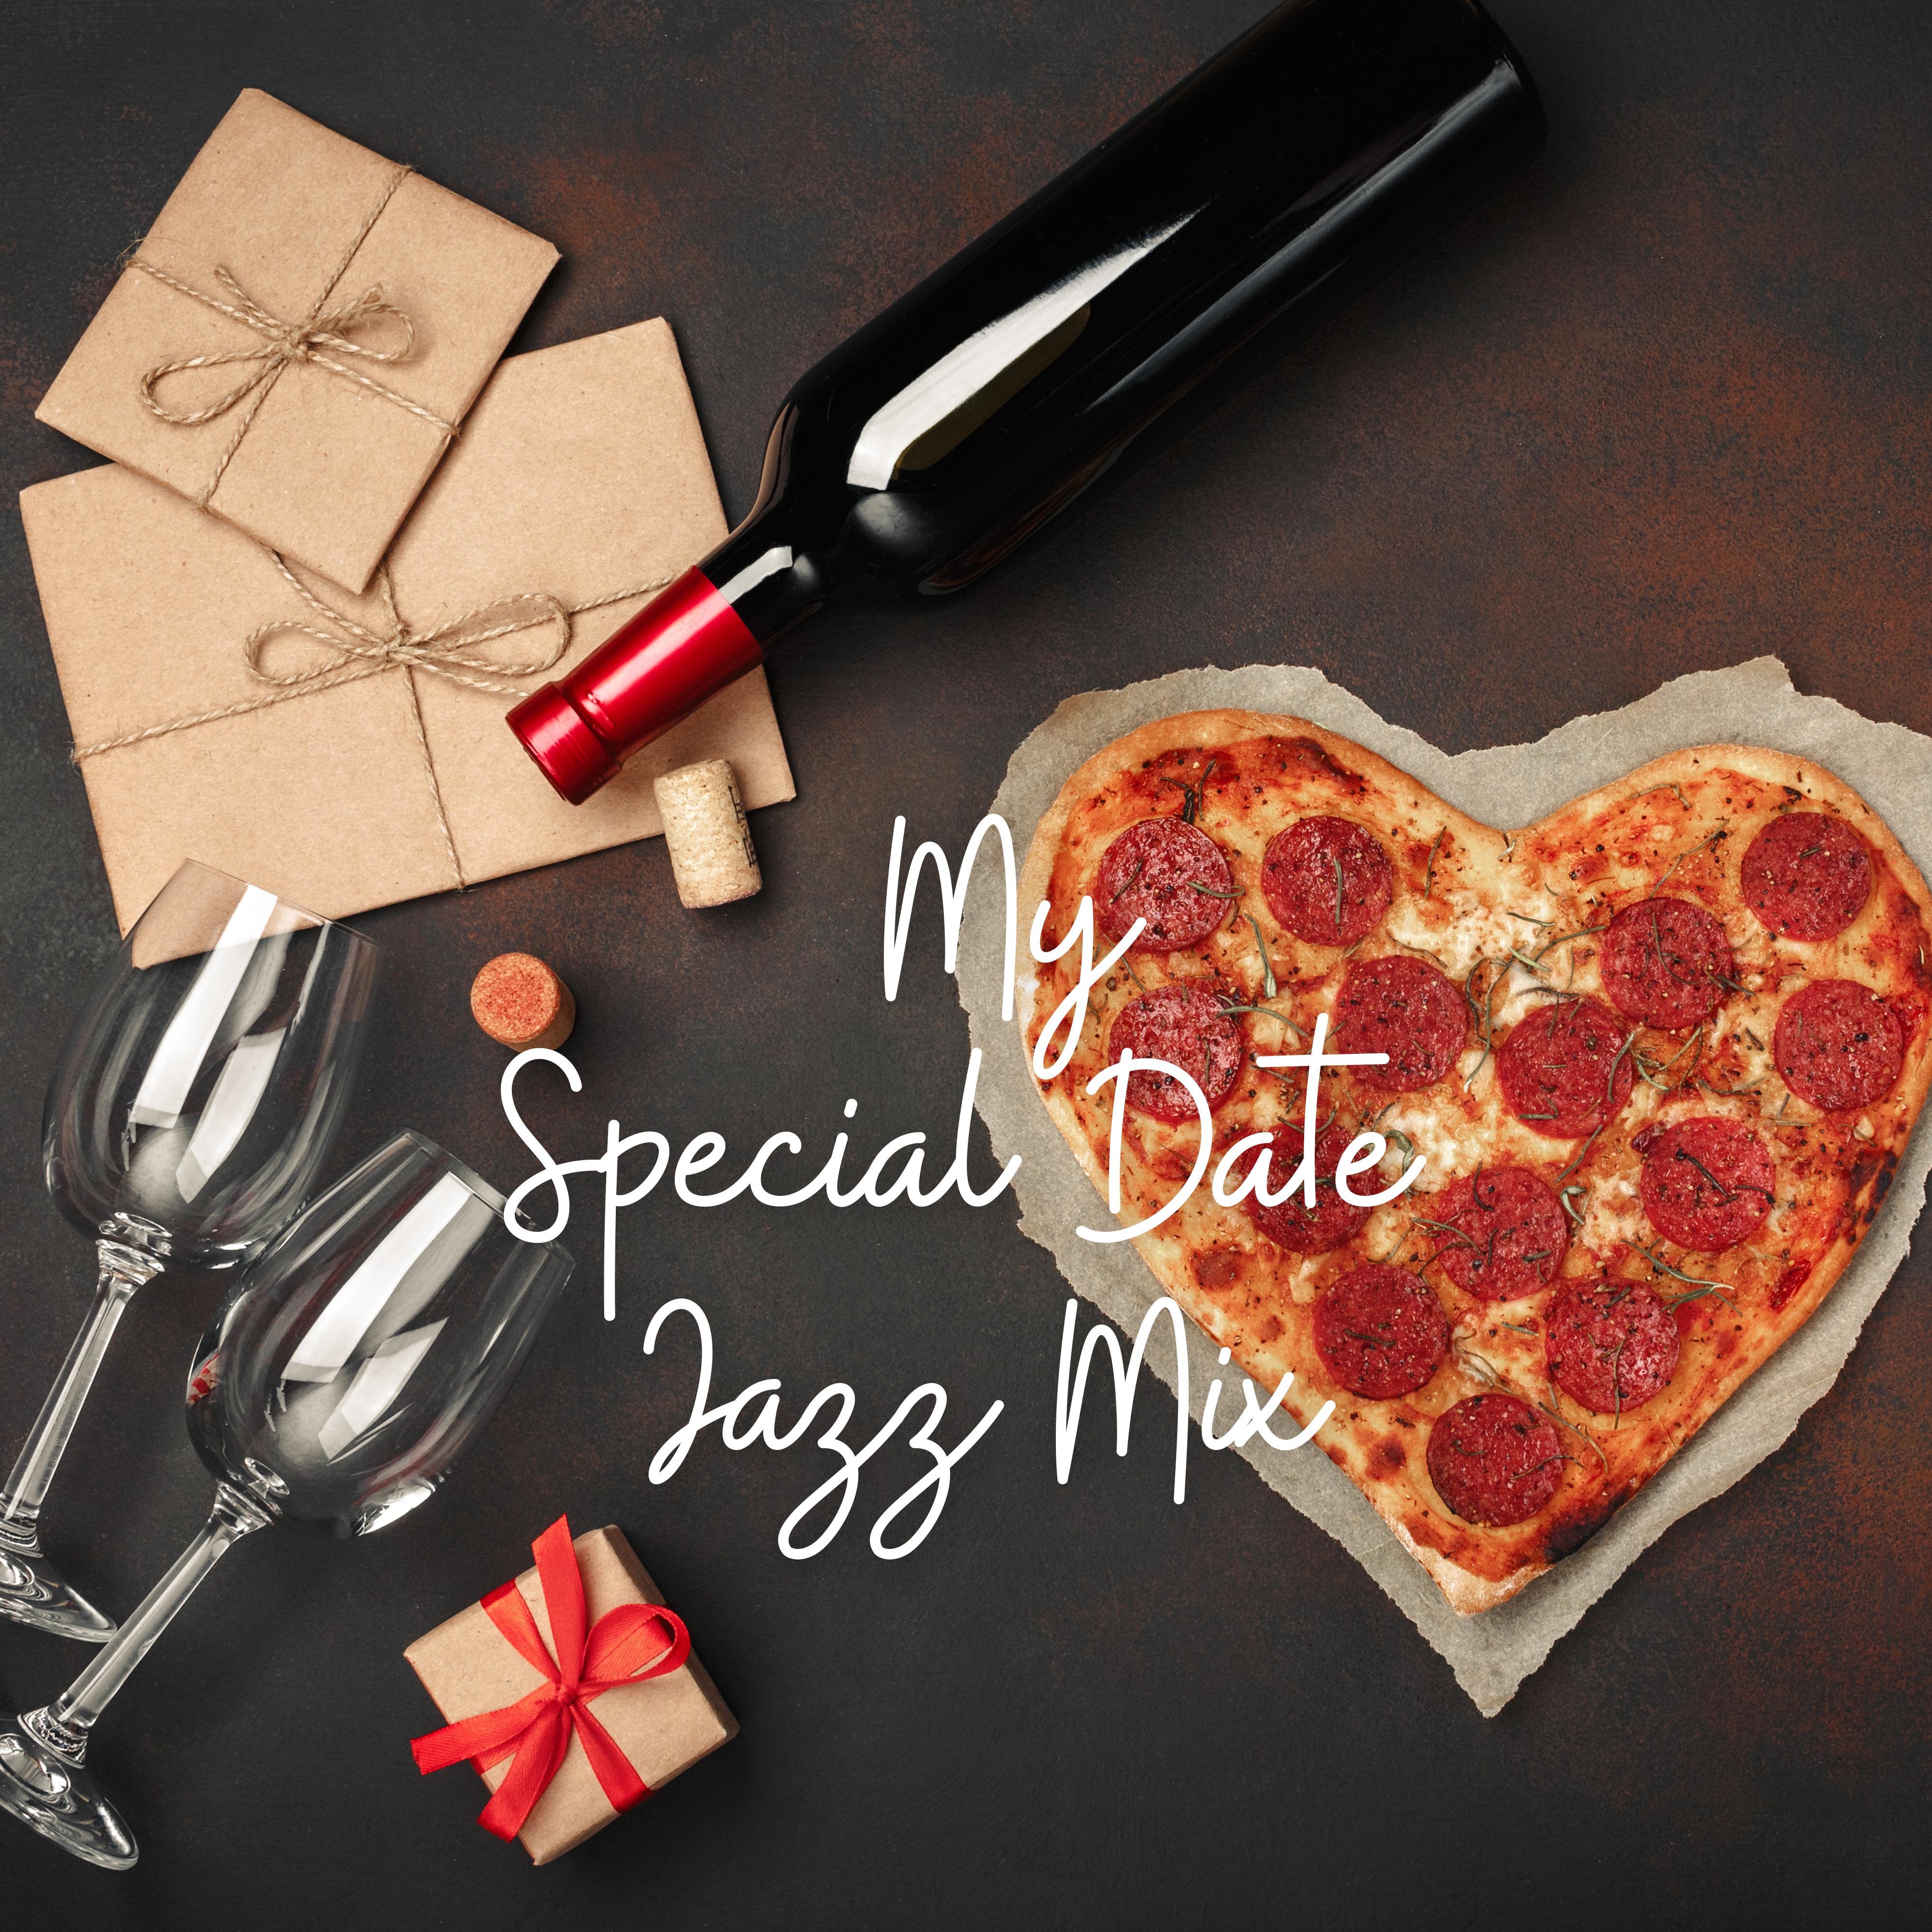 My Special Date Jazz Mix: 2019 Instrumental Smooth Jazz Music Compilation Created for Romantic Date with Love, Perfect Couple’s Time Spending in Restaurant, Sensual Sounds for Evening Full of Love & Sex